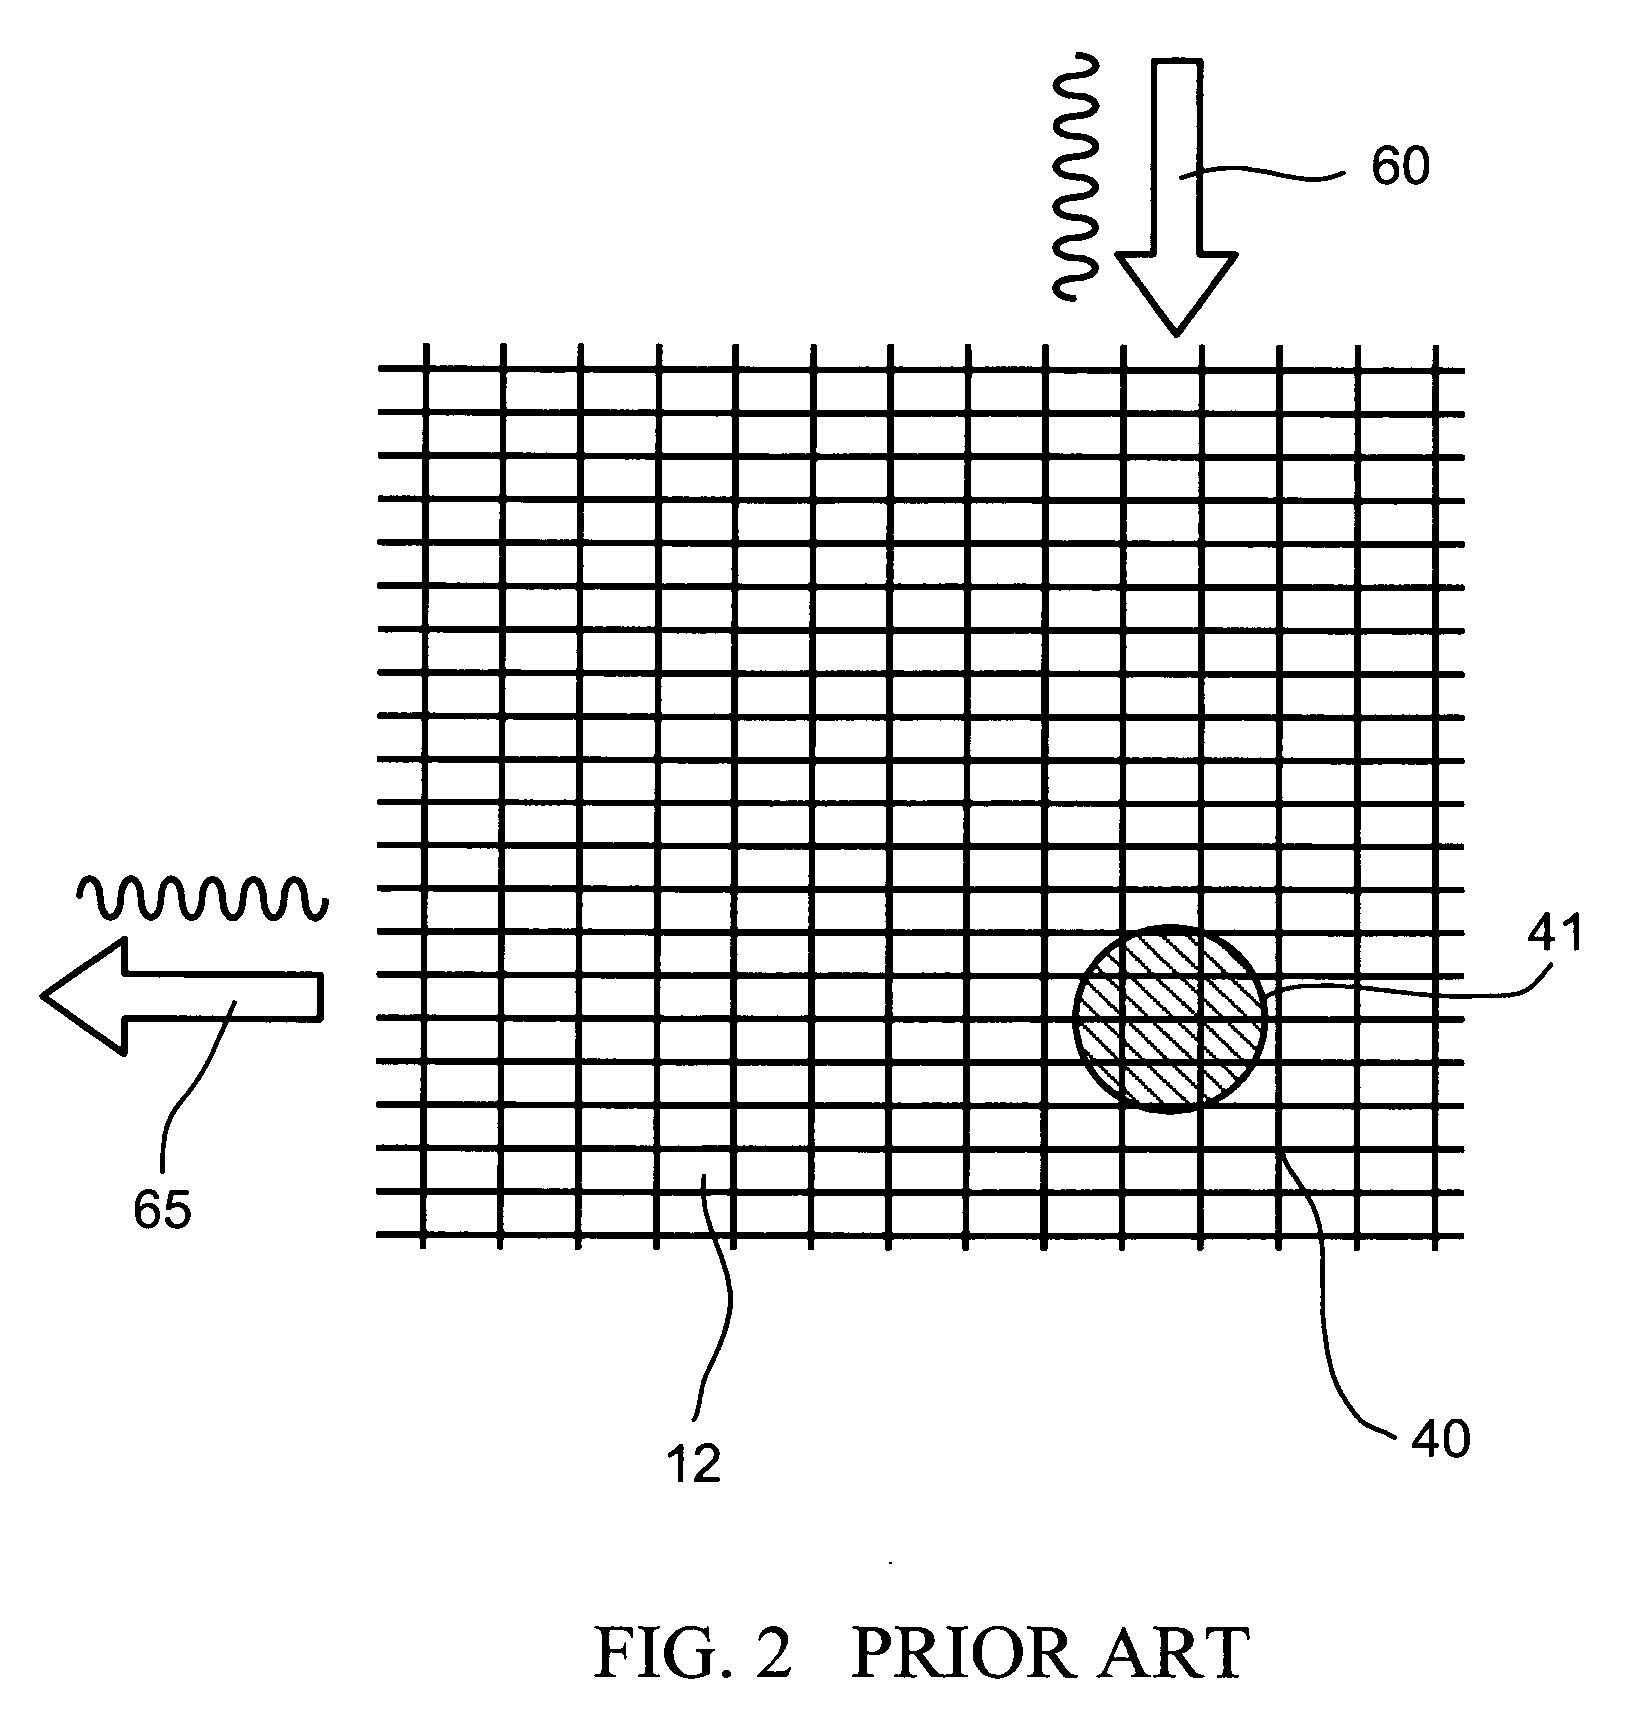 Method for palm touch identification in multi-touch digitizing systems